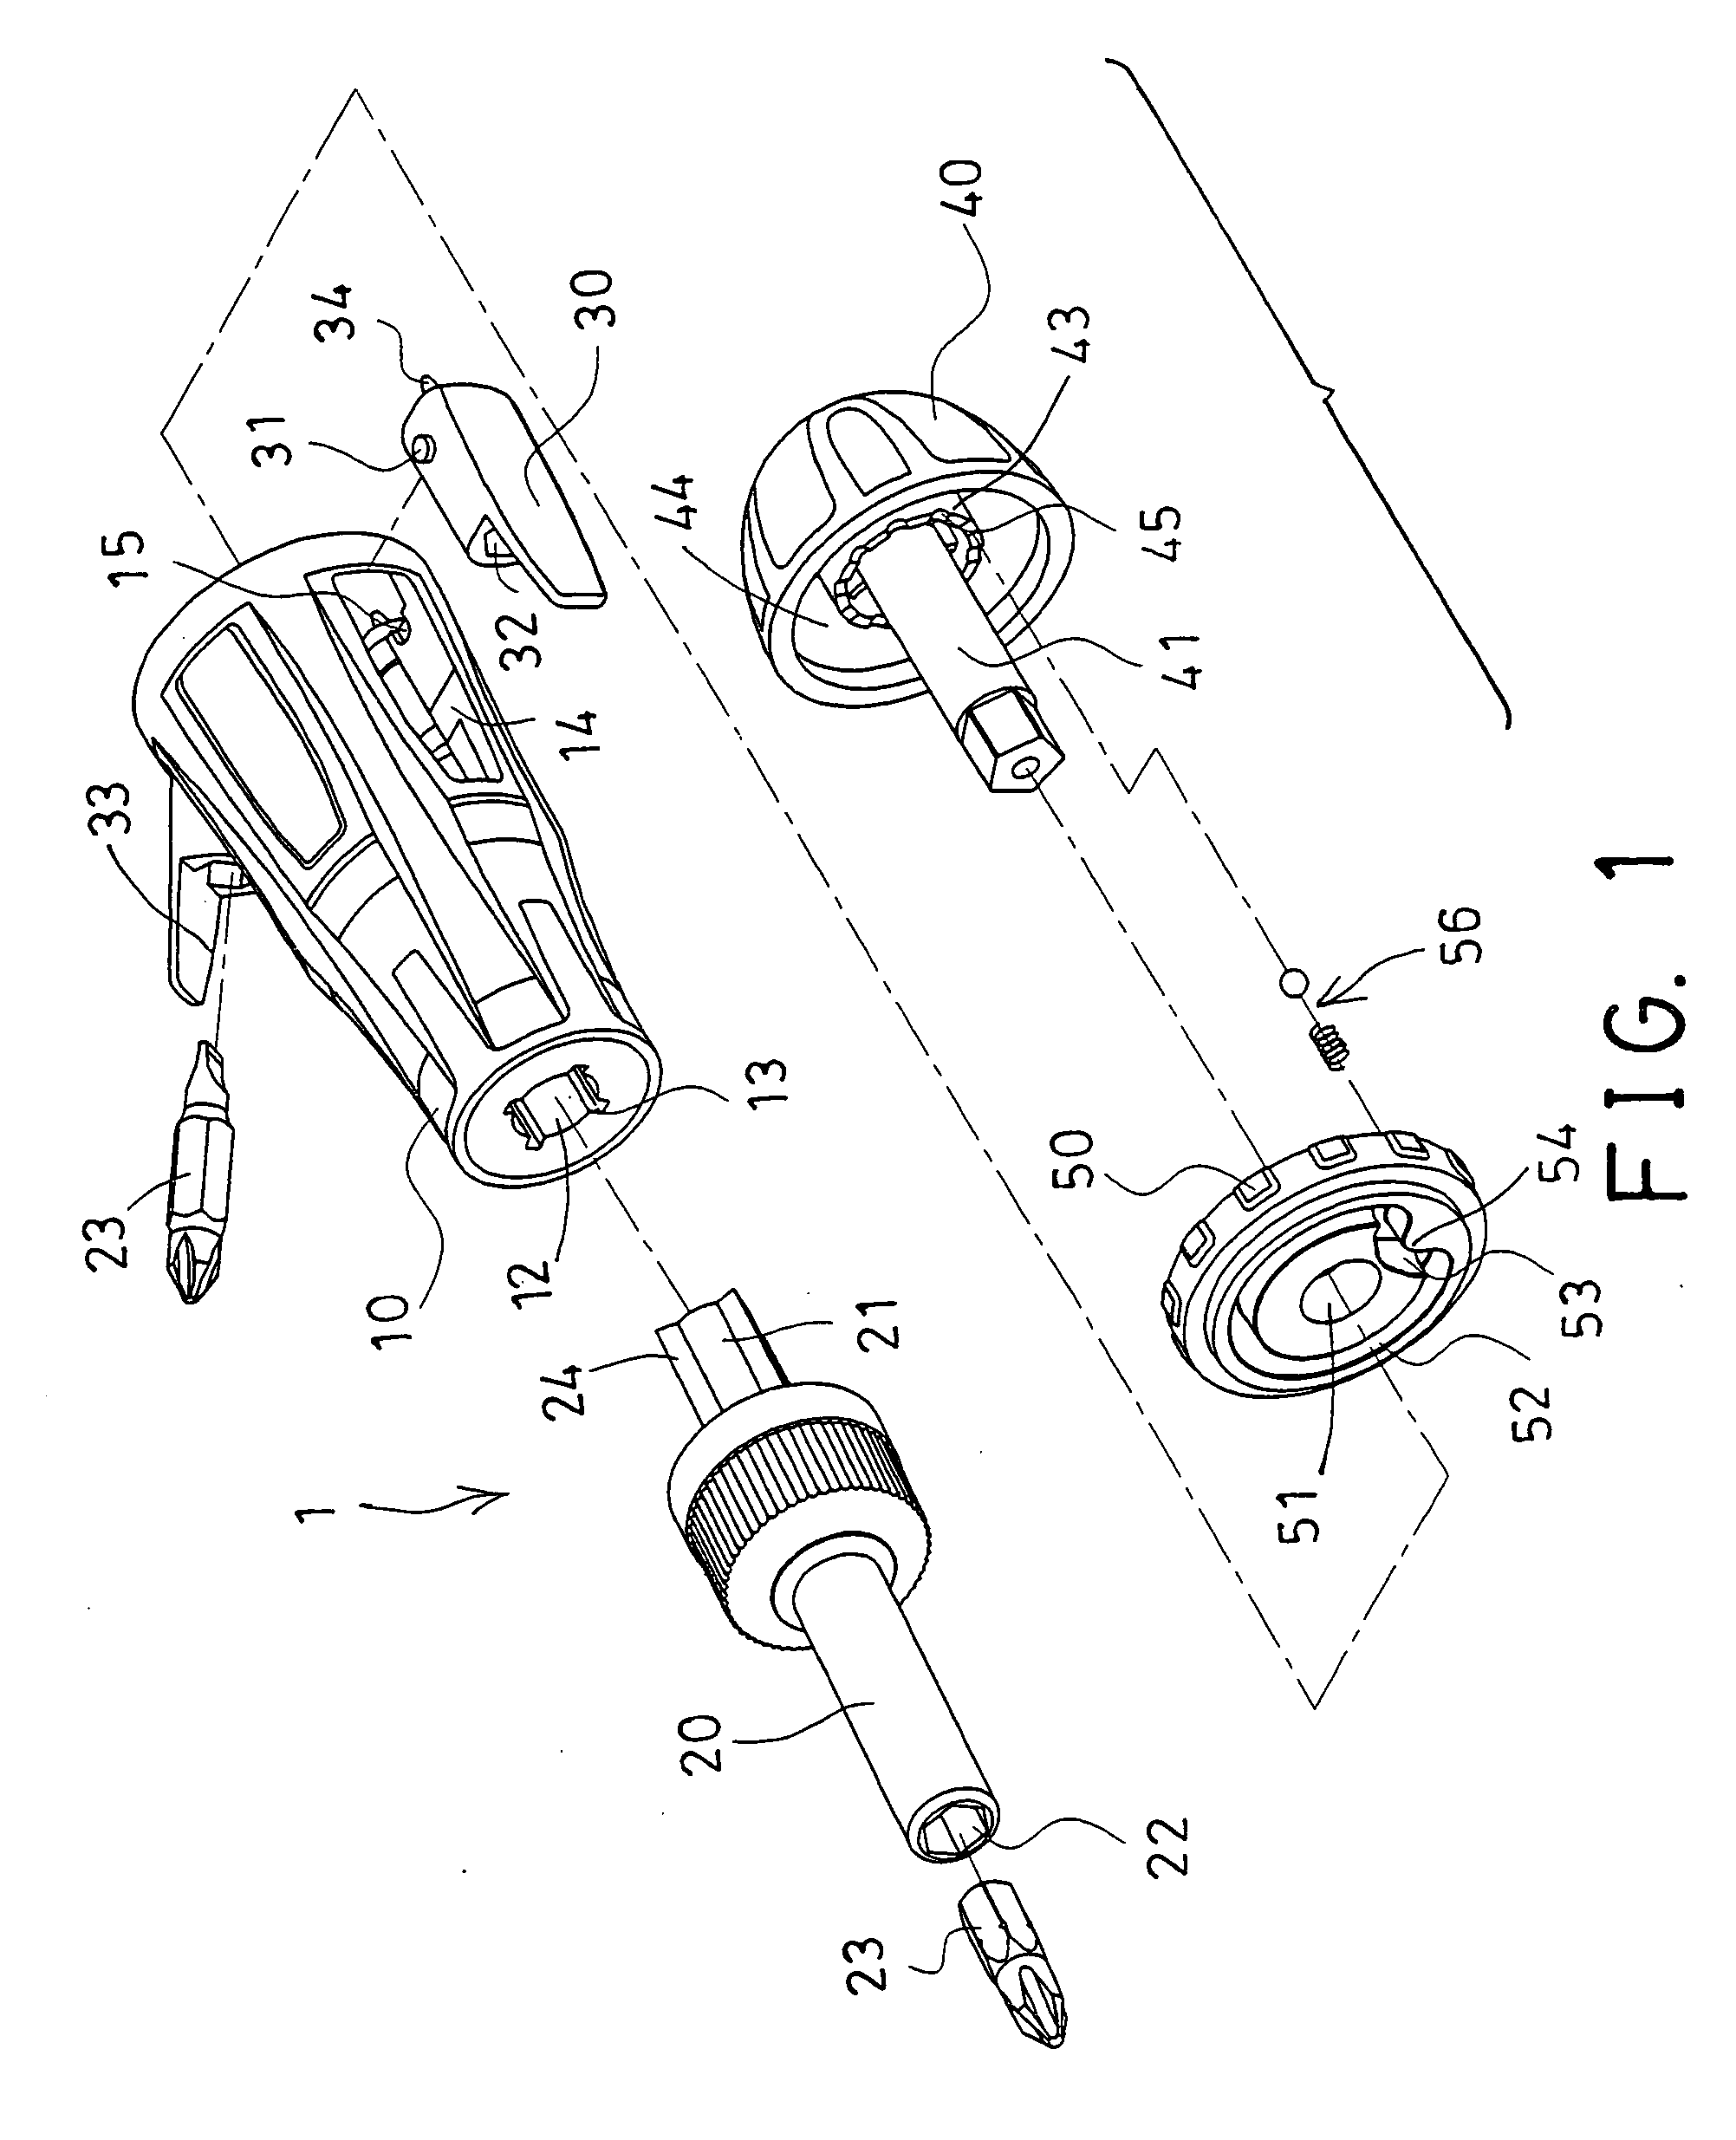 Tool handle having tool receiving structure